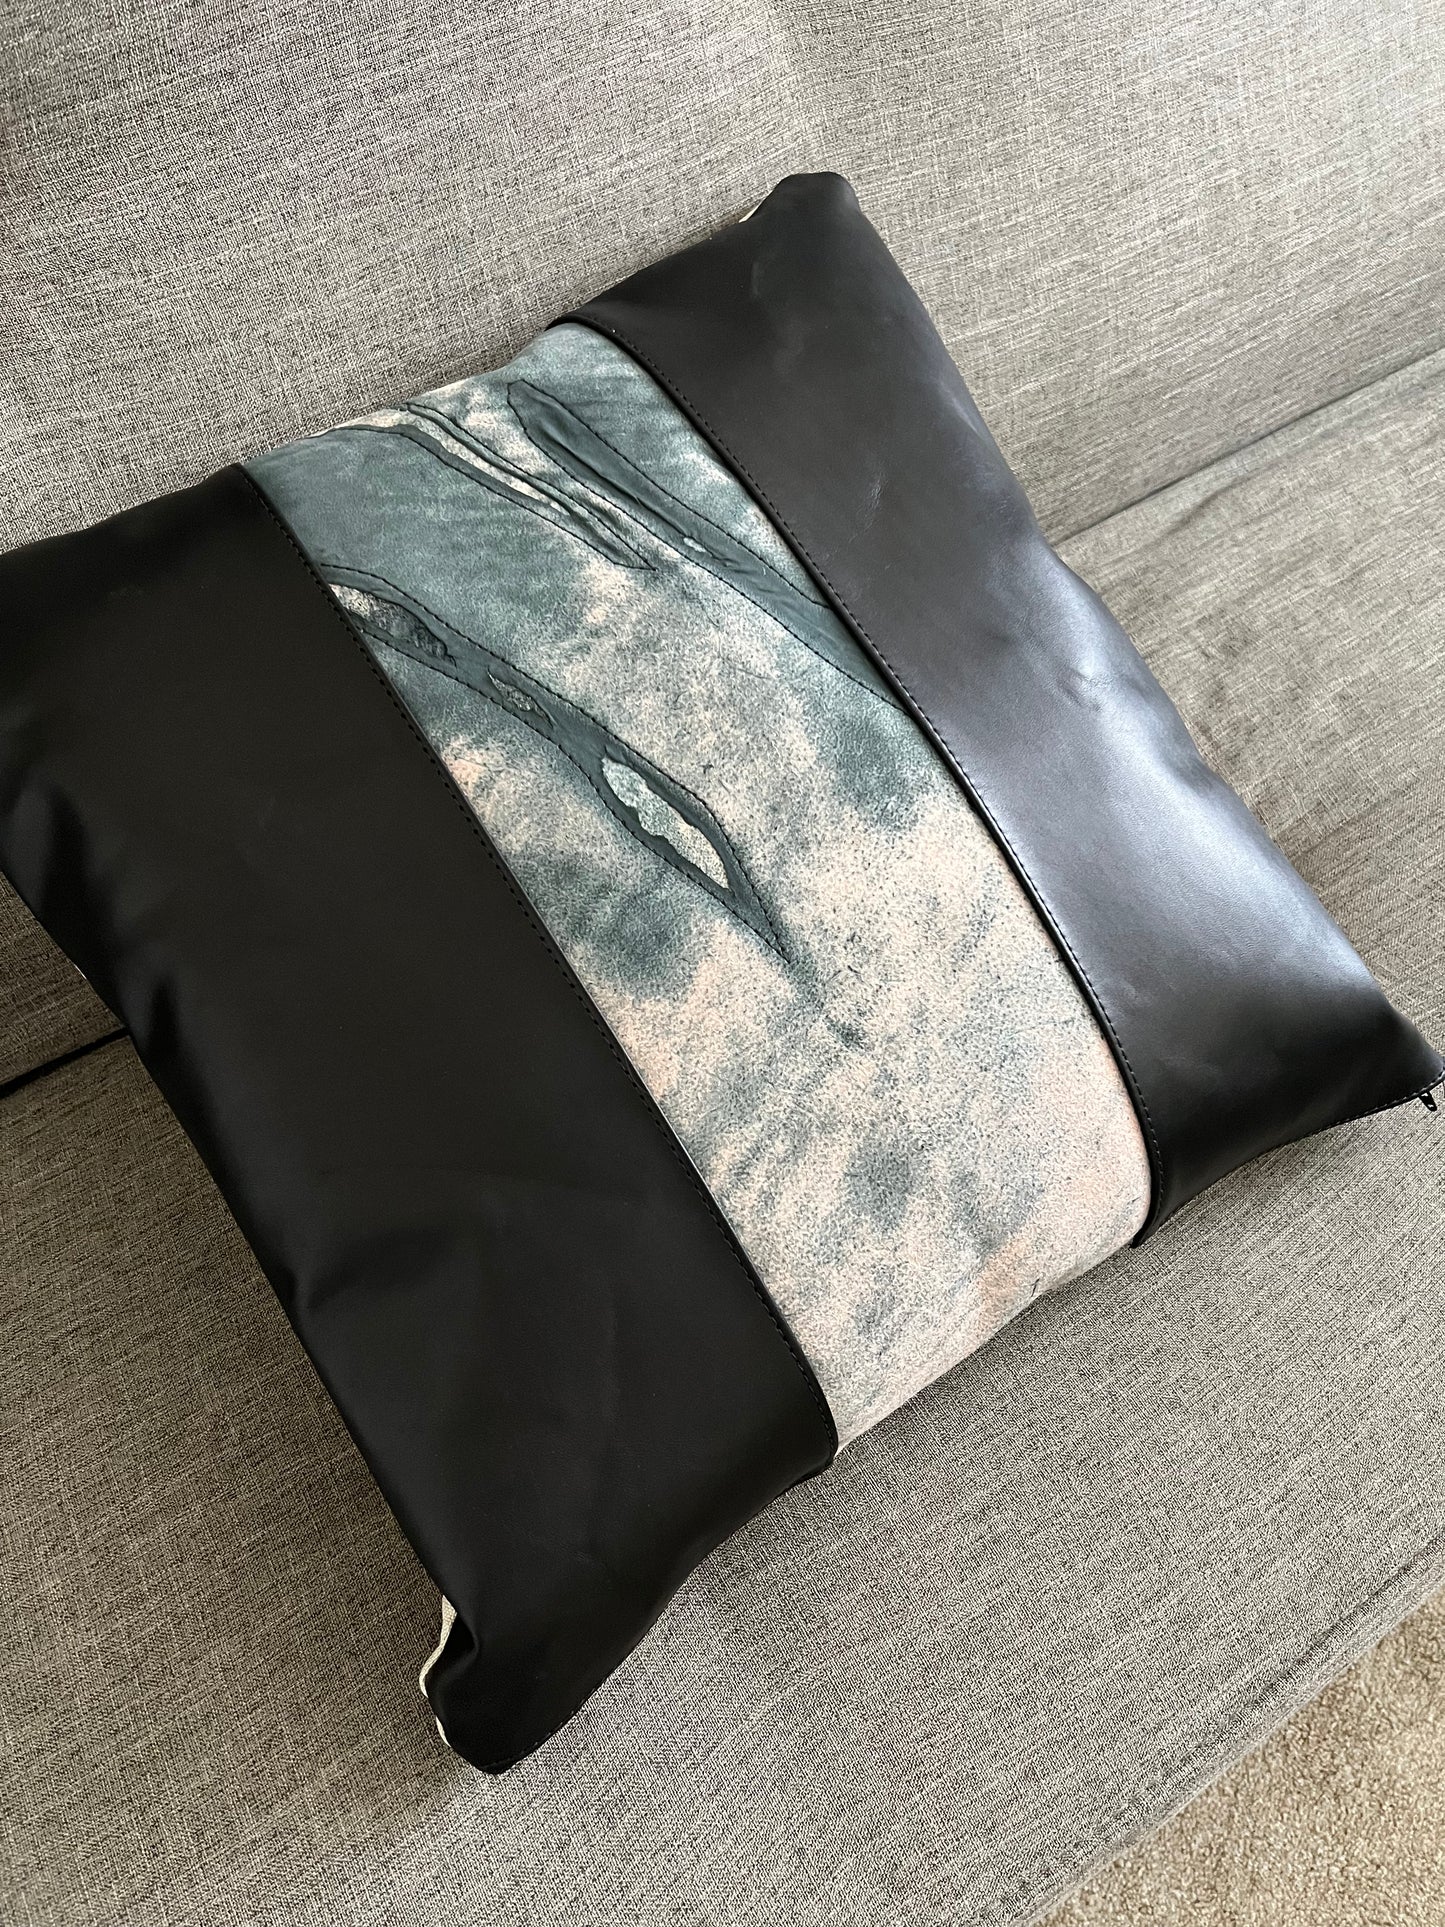 Modern, artsy, leather throw pillow in black and grey tones, rests on a grey couch.